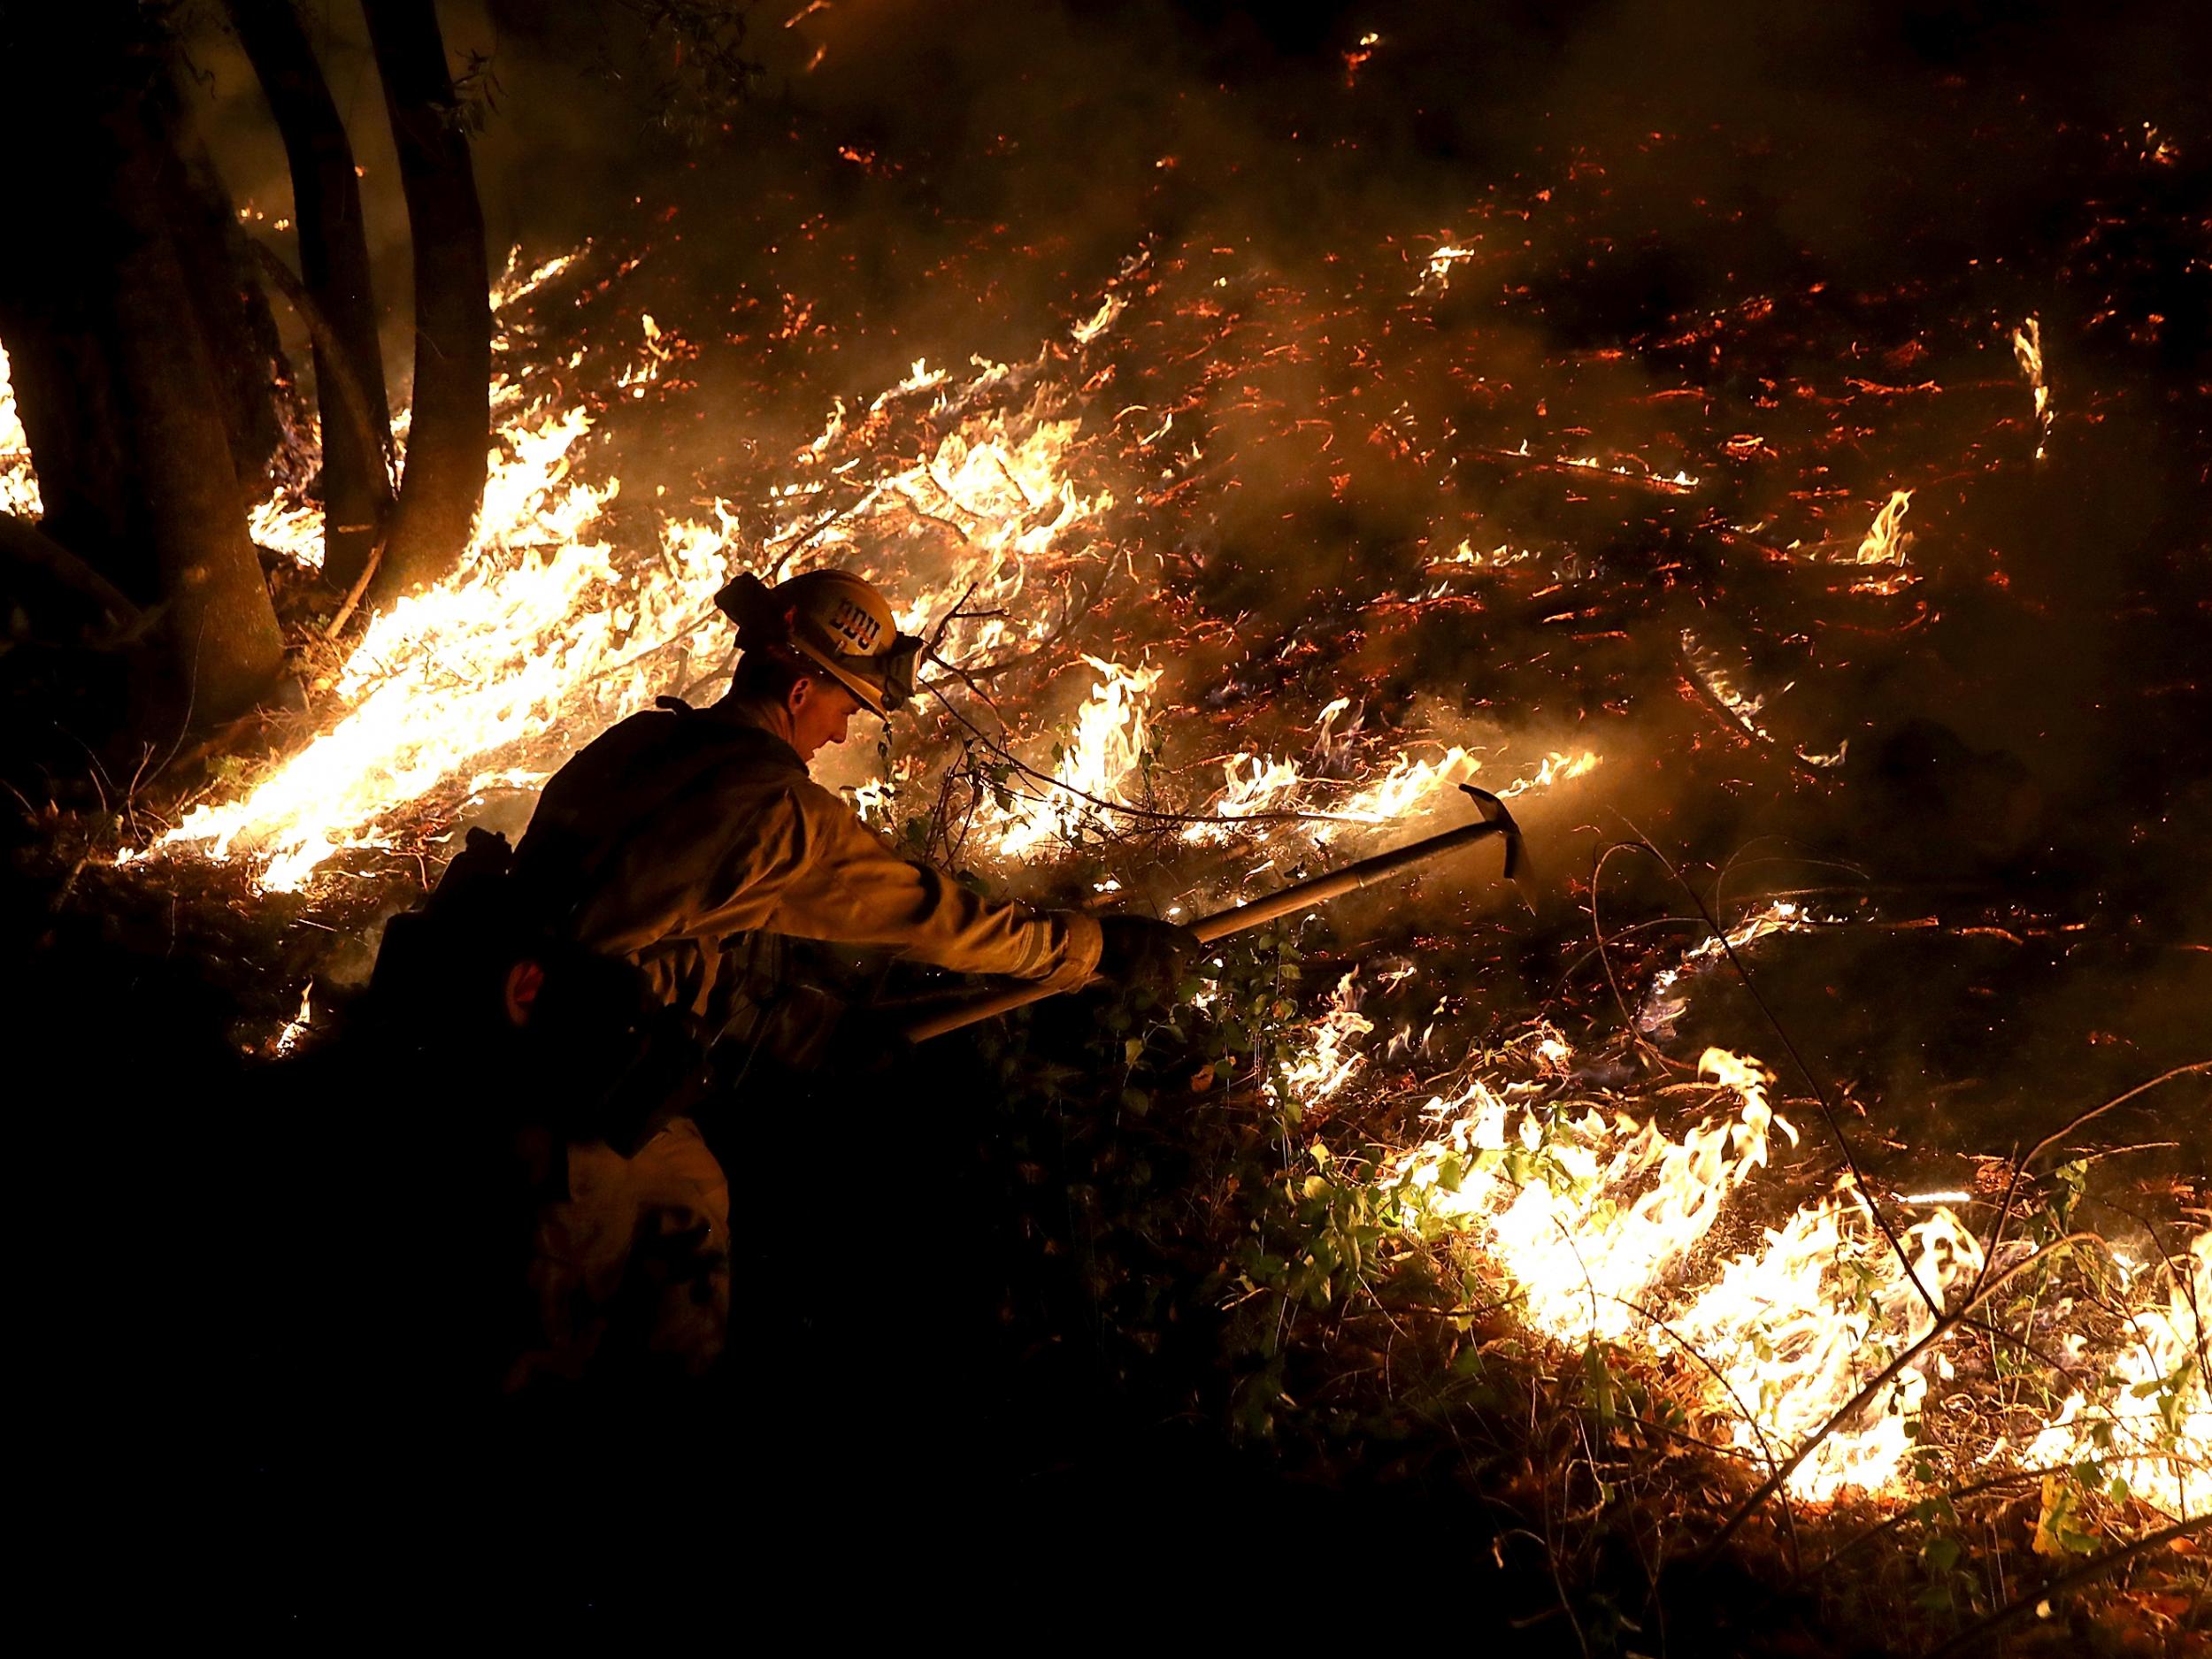 A firefighter works to contain fire in California